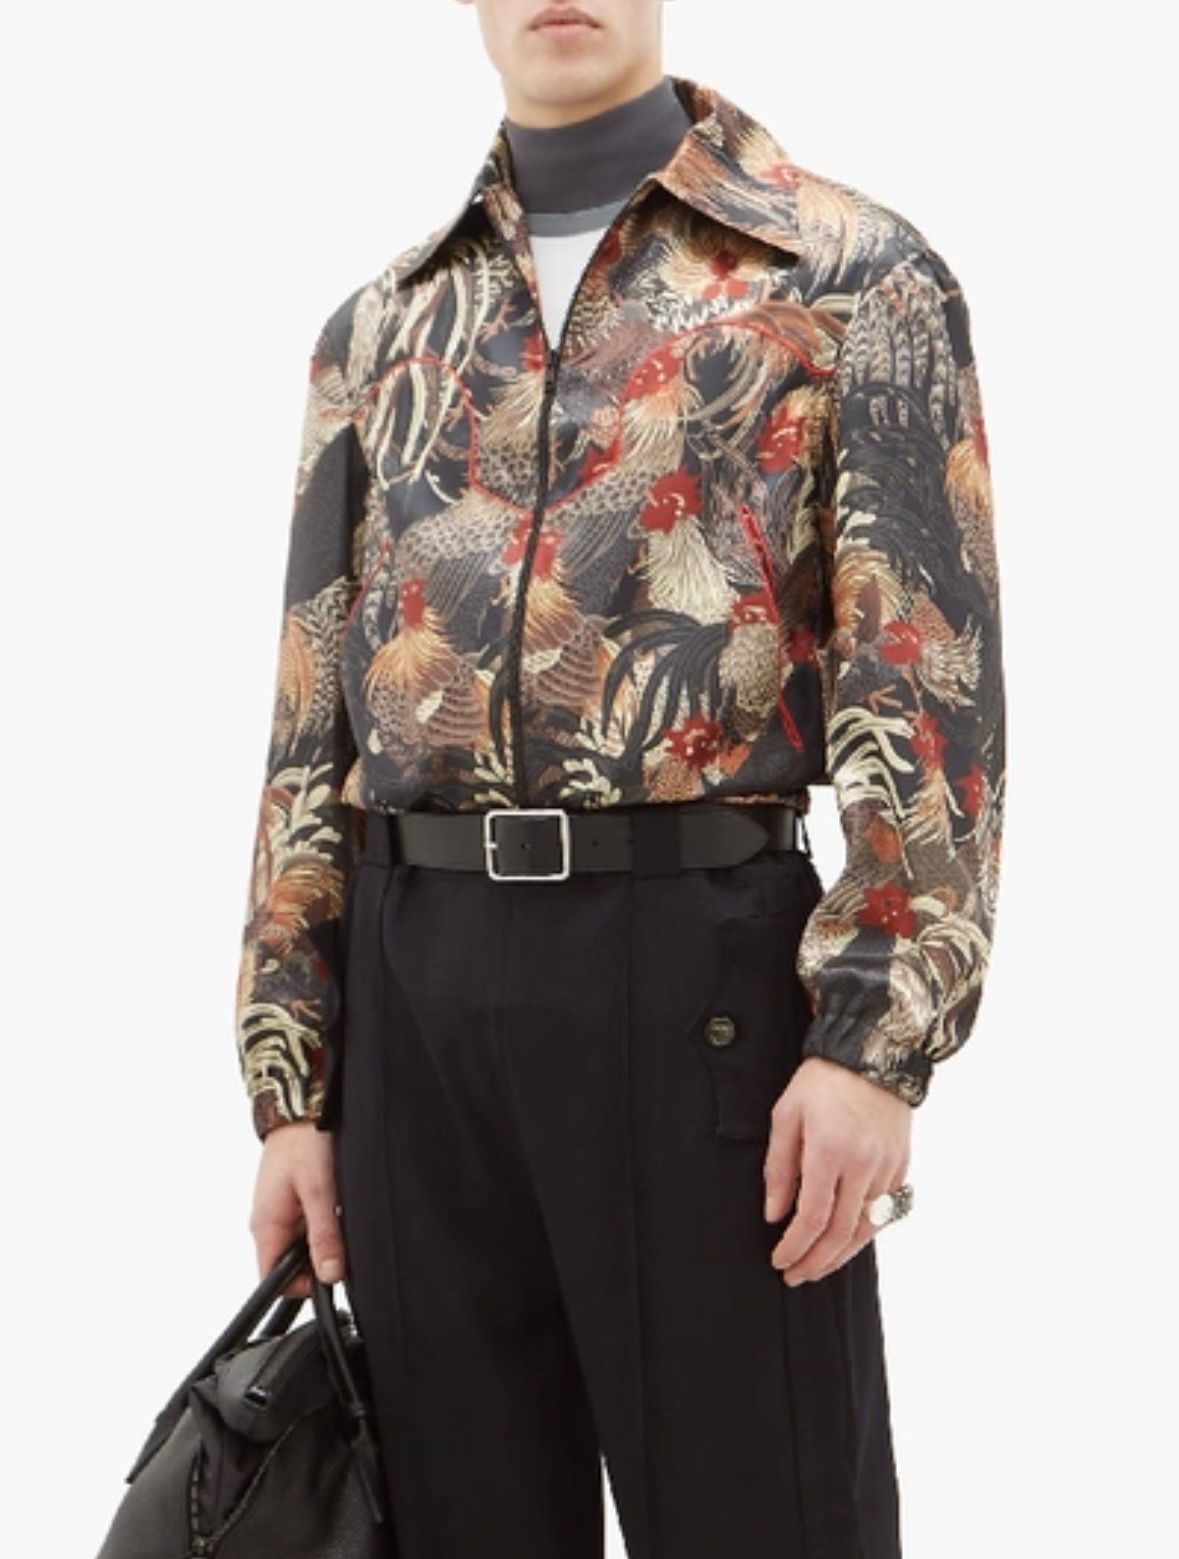 Other - Boramy Viguier Rooster-print satin coach jacket - 6